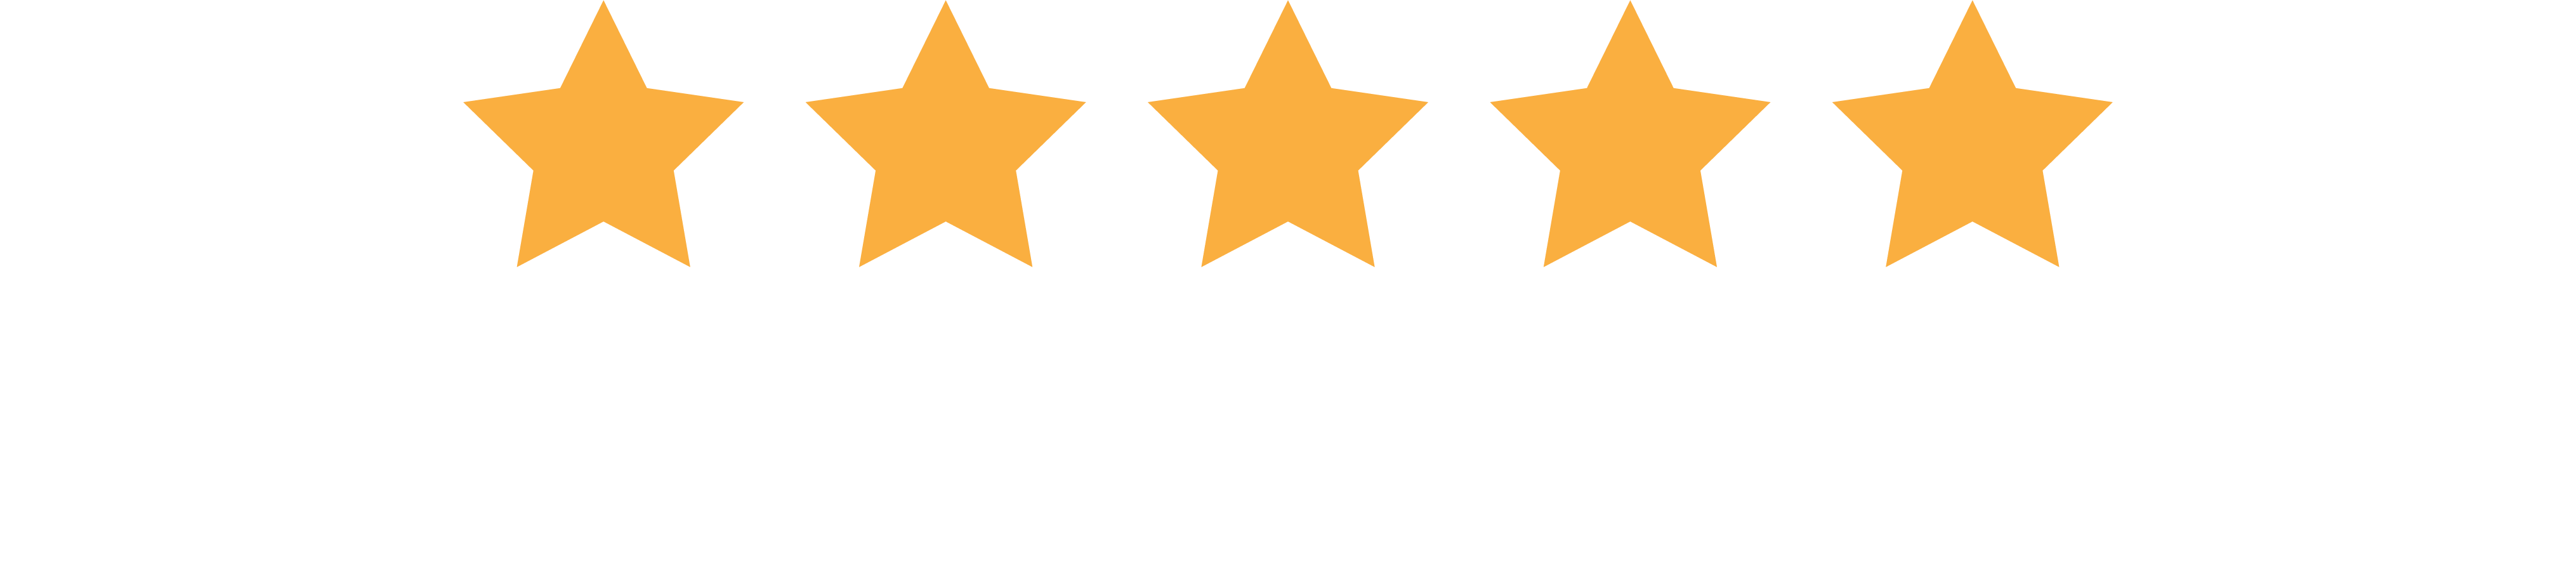 Five Star Google Reviews Graphic